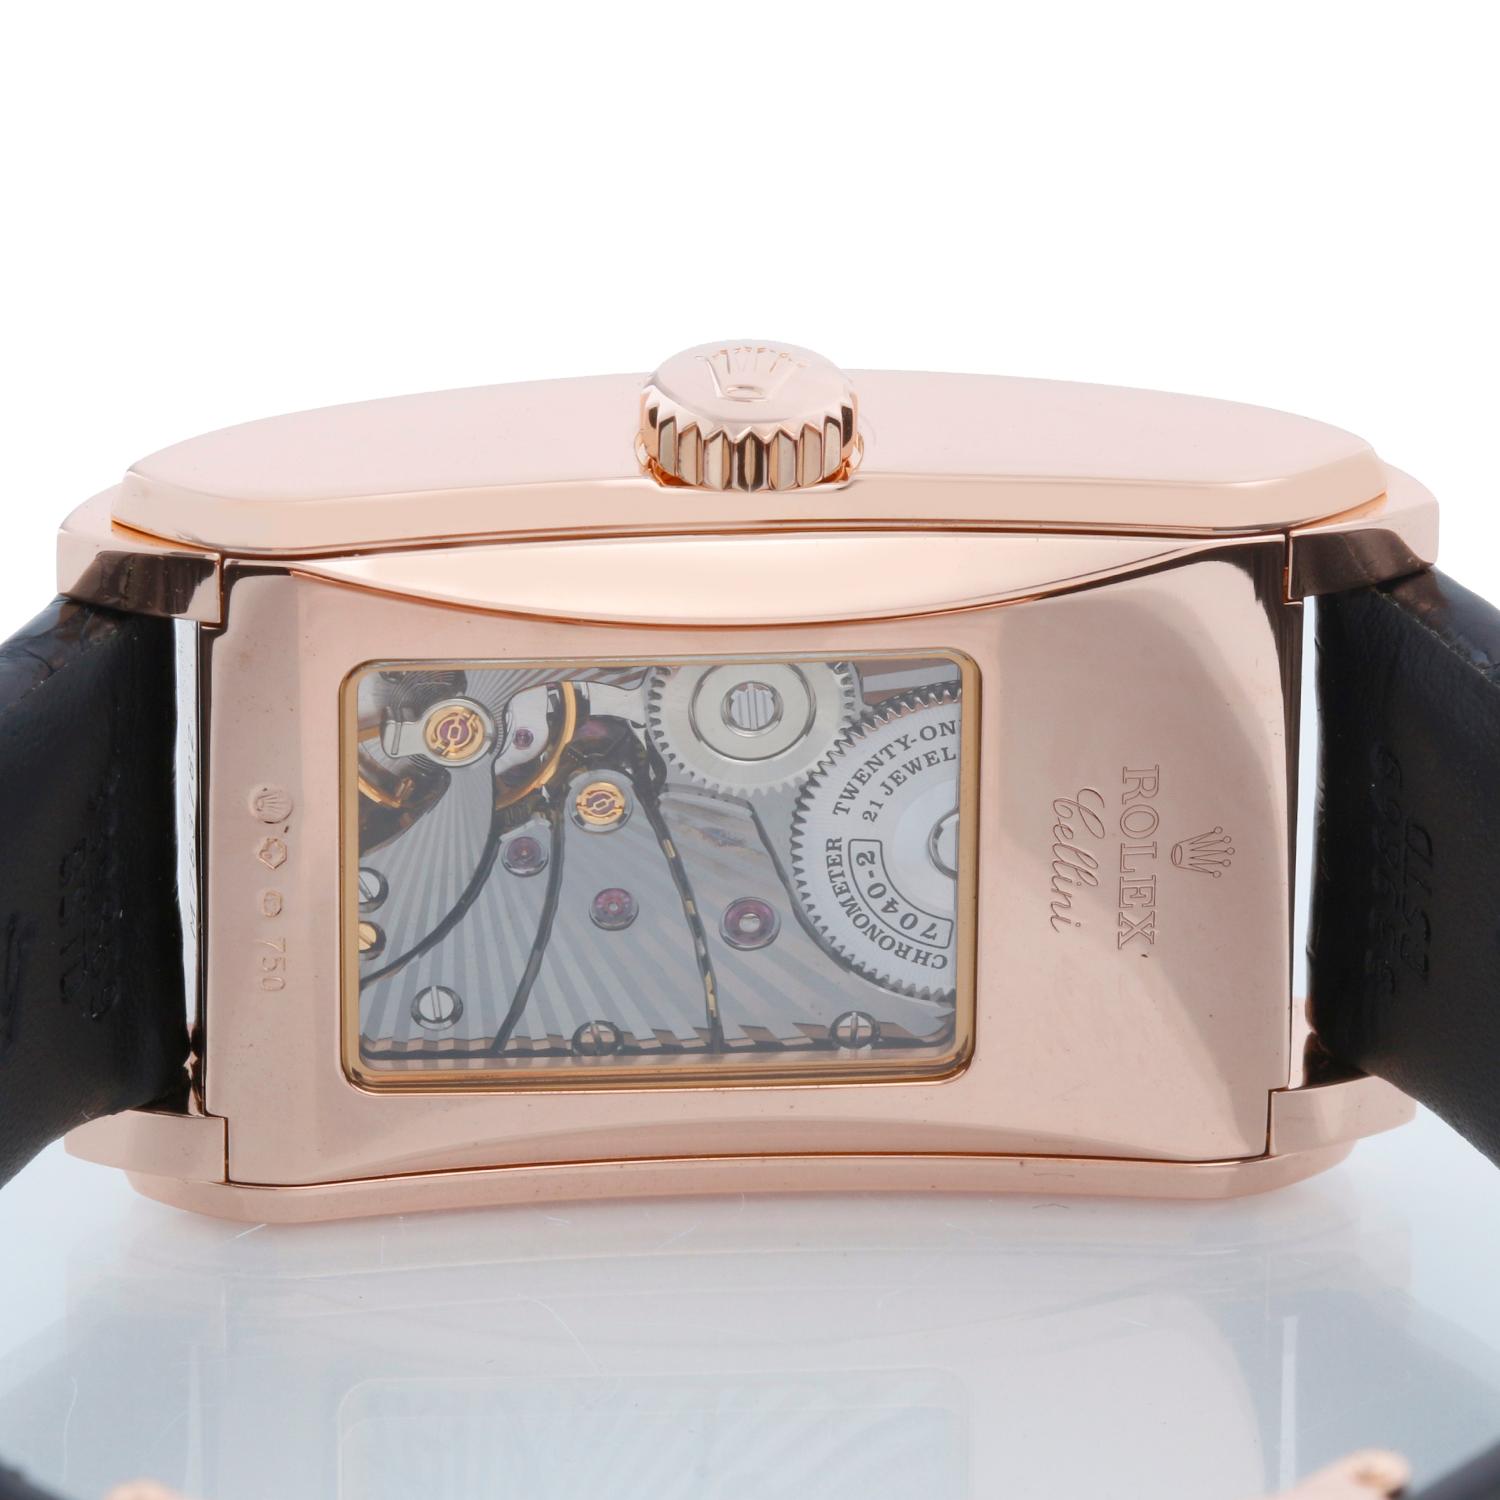 Rolex Cellini Prince 18k Rose Gold Men's Watch 5442 For Sale 2